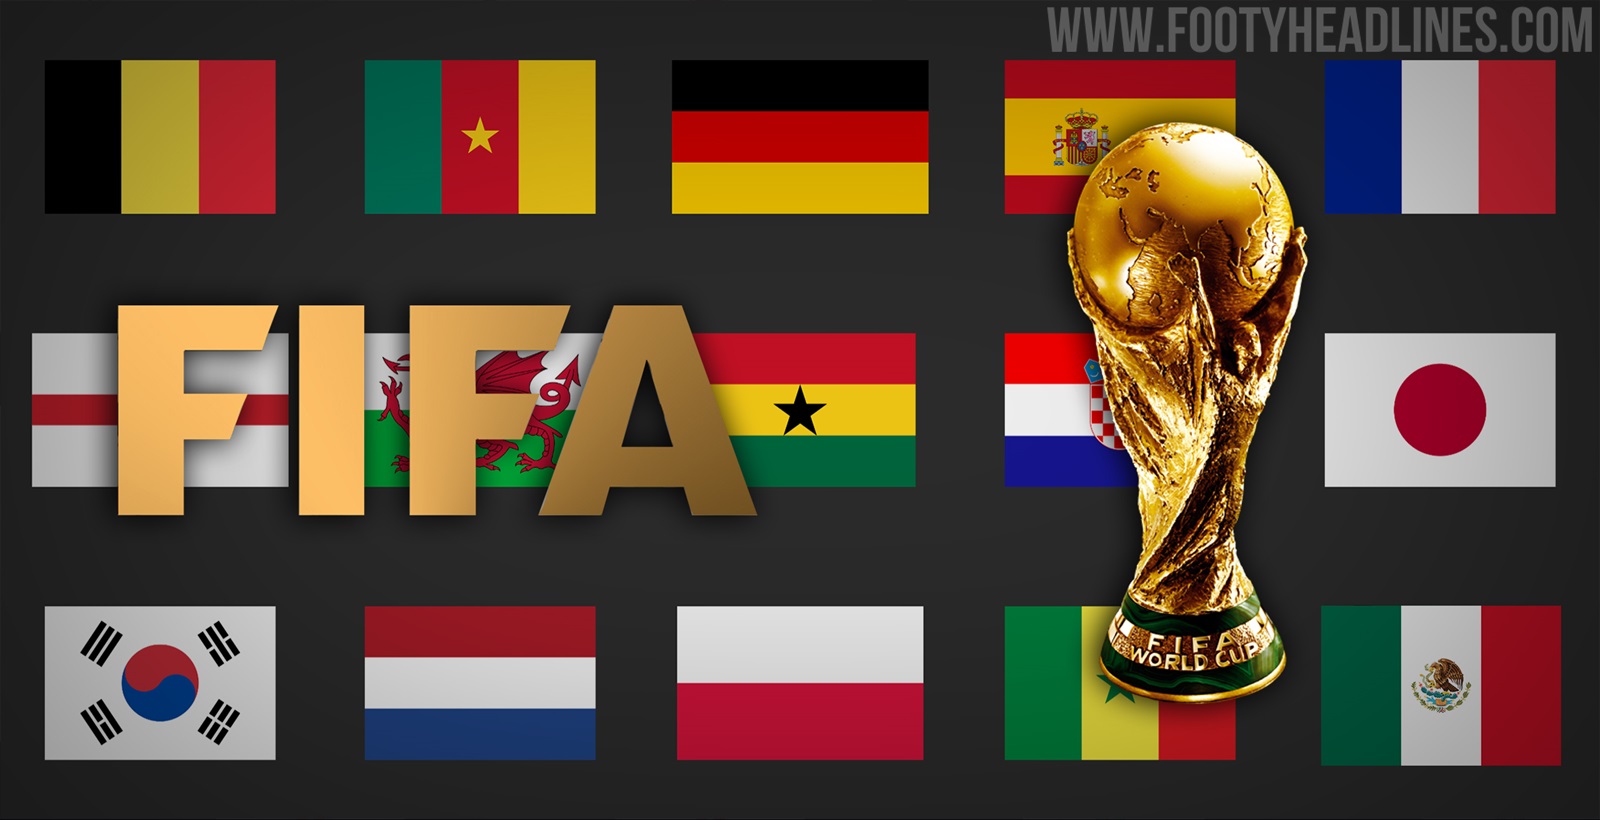 15 Teams to Only Use Home Kit in 2022 World Cup Group Stage